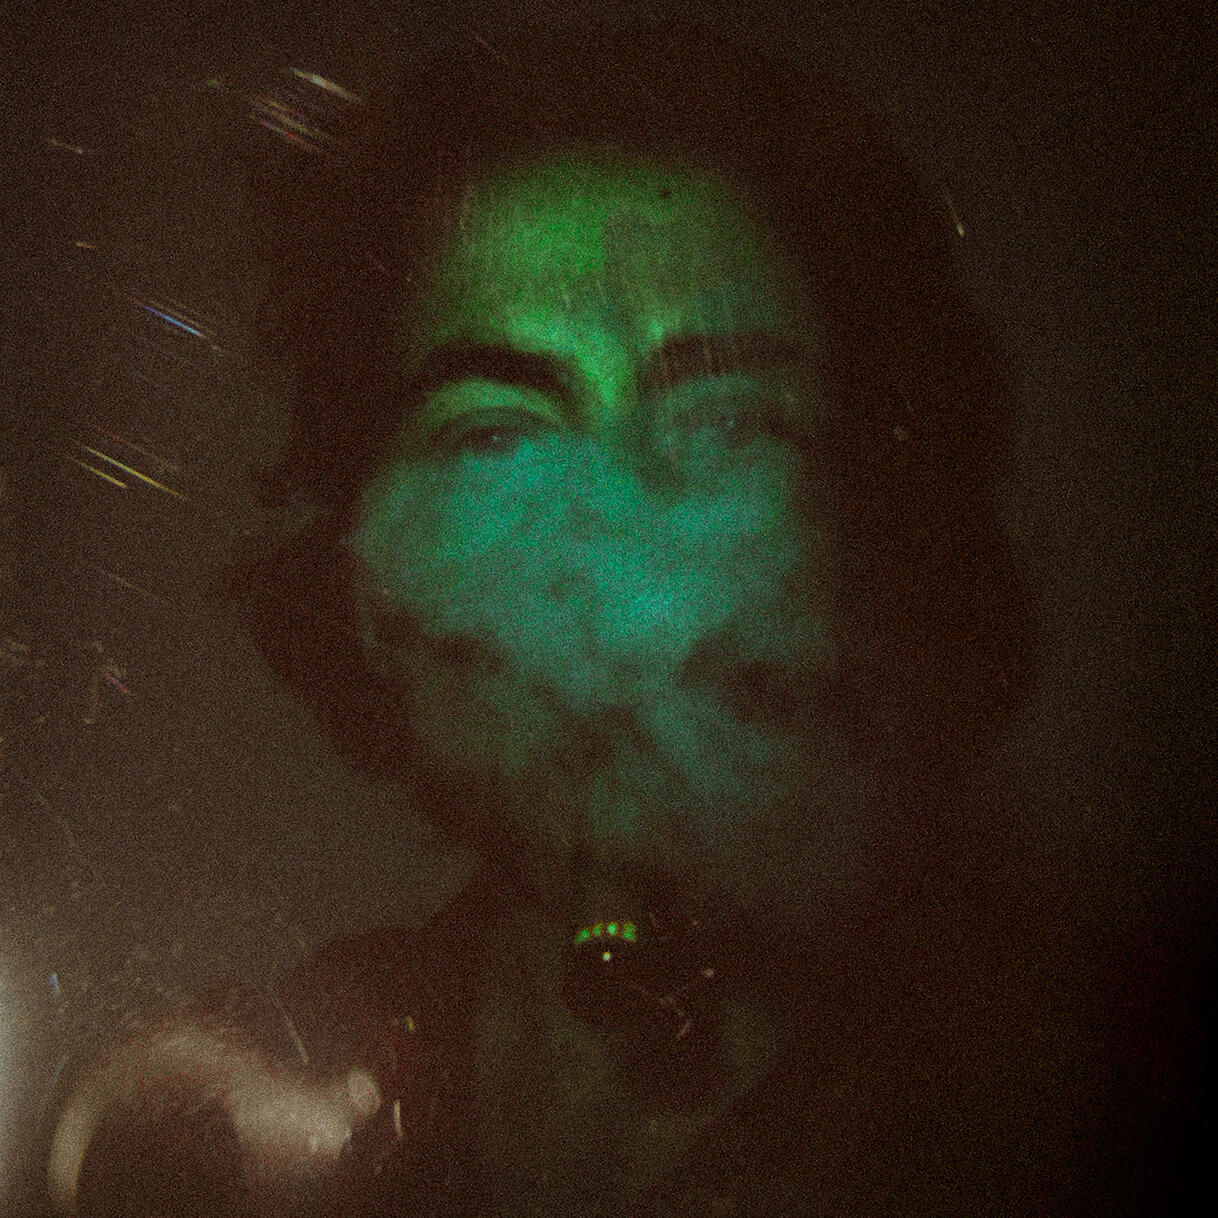 A picture of Mason, a white male, looking at the camera while smoke obscures the bottom half of his face. The entire photo is tinted blue-green.